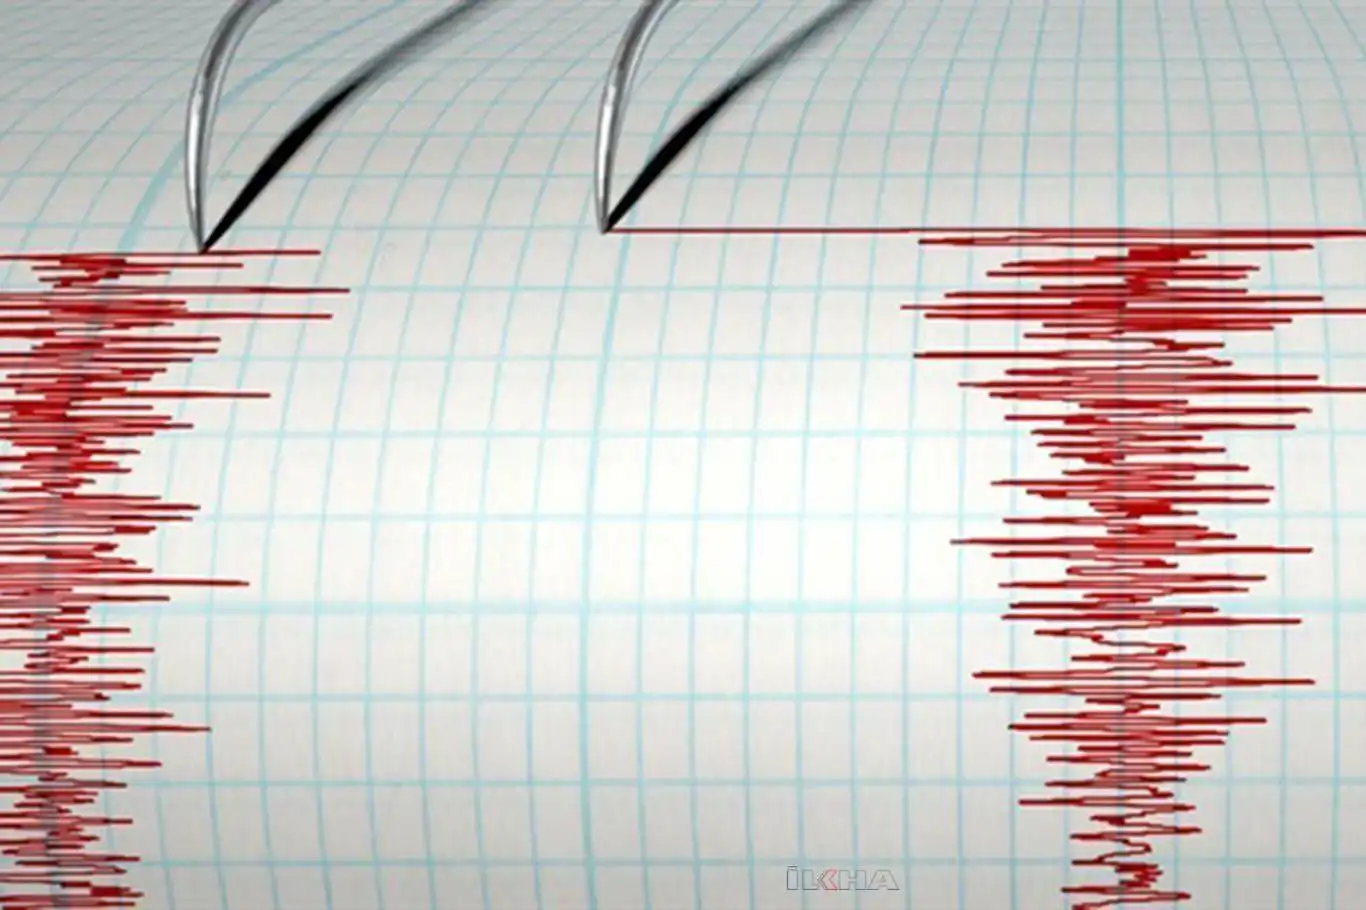 Strong earthquake shakes western Brazil, no initial reports of damage